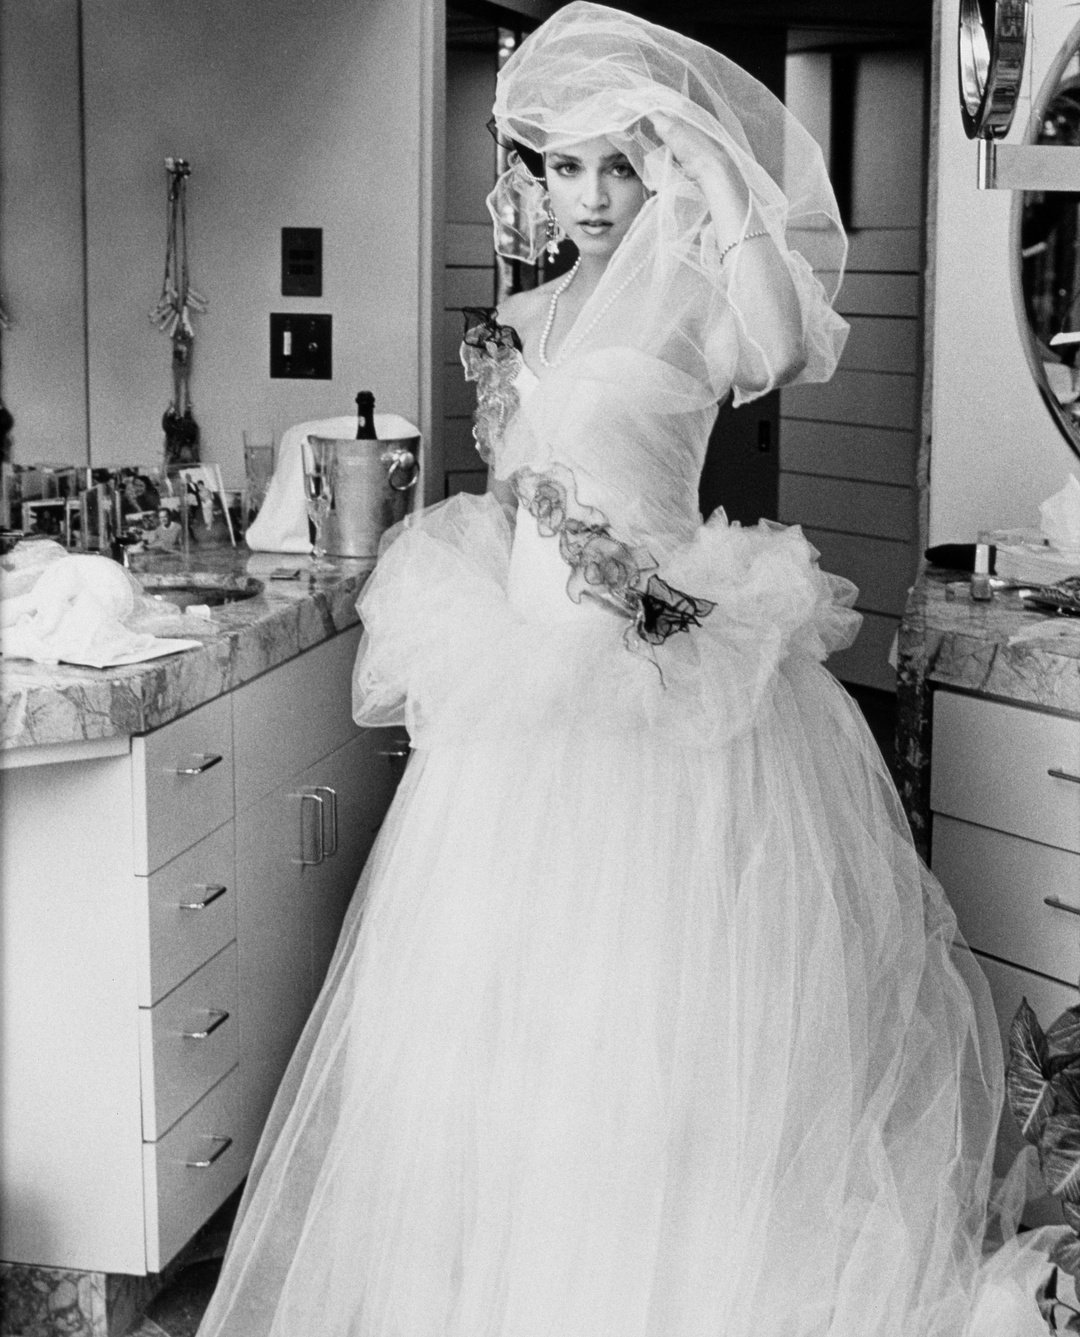 Madonna on her wedding day in 1985